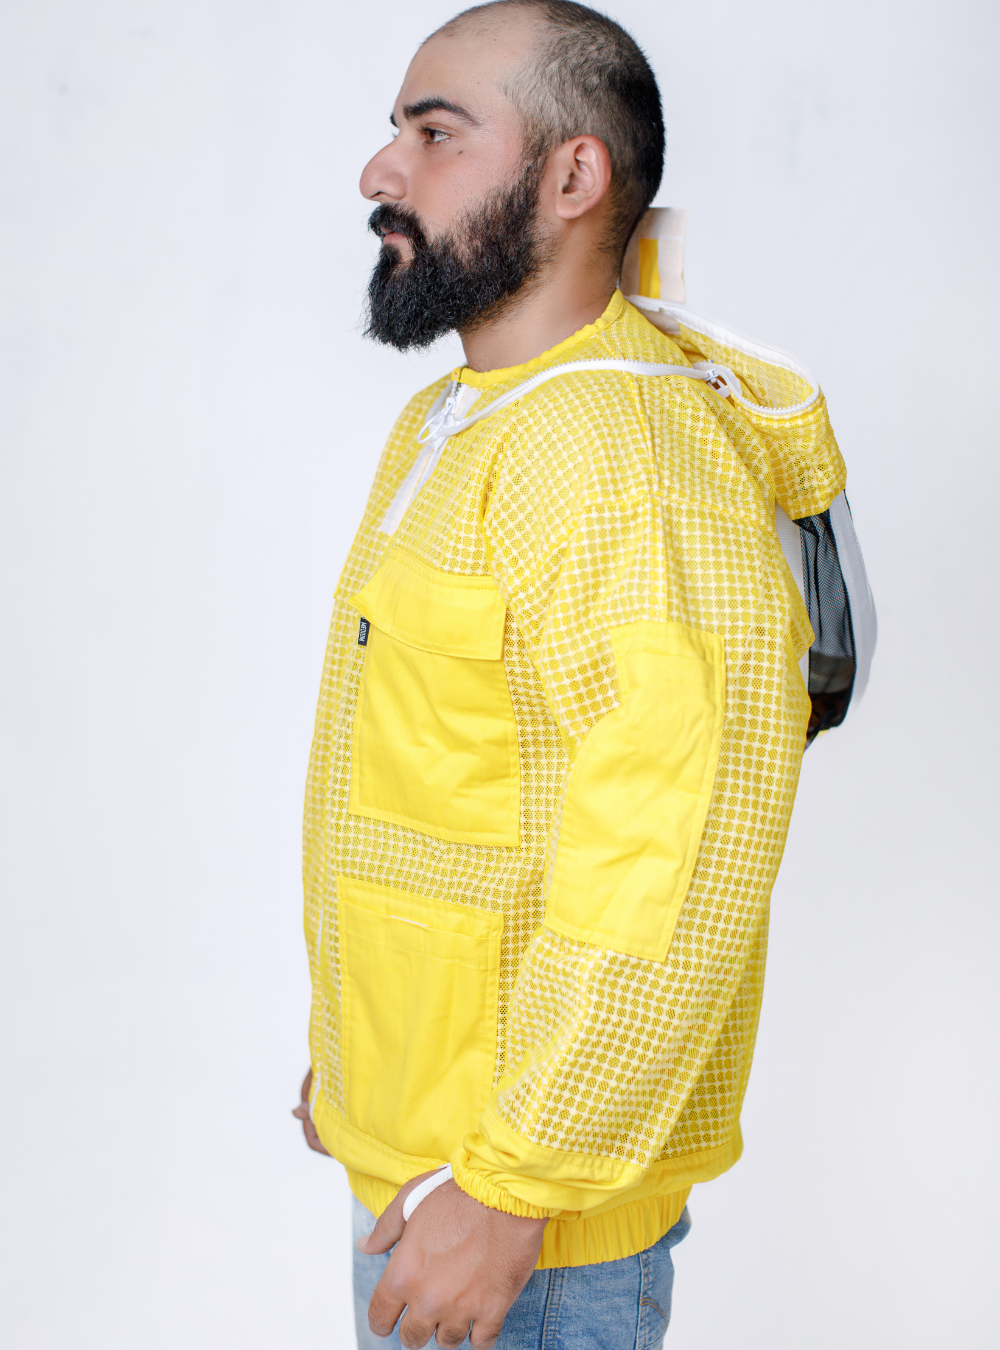 A side profile of Yellow Beekeeping Ventilated Jacket featuring a detachable Fencing veil and elastic comfy cuffs.